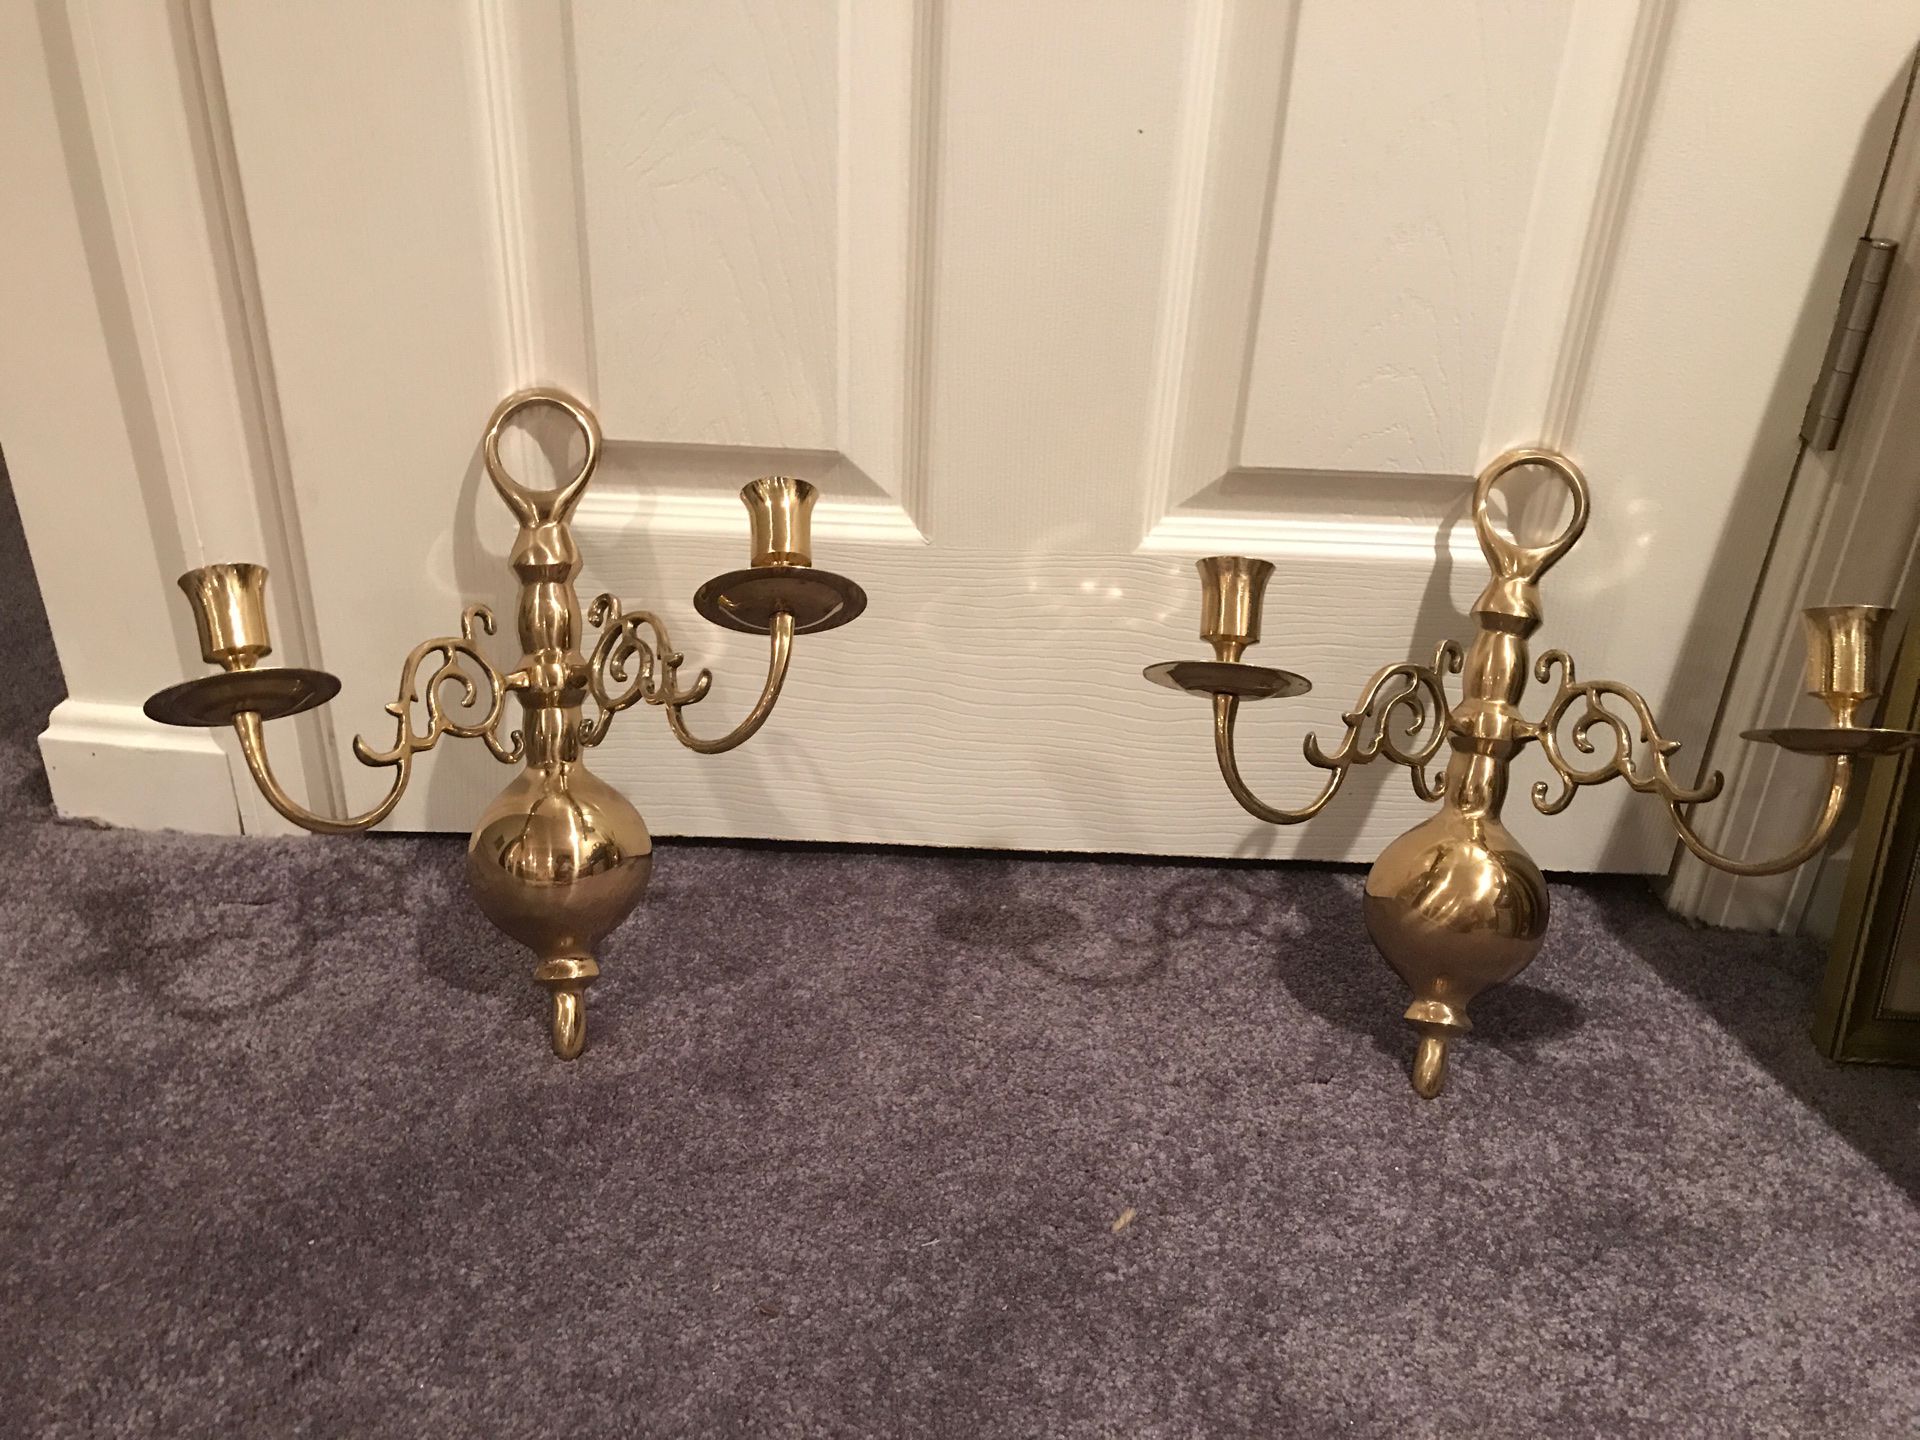 2 Double Arm Wall Sconces